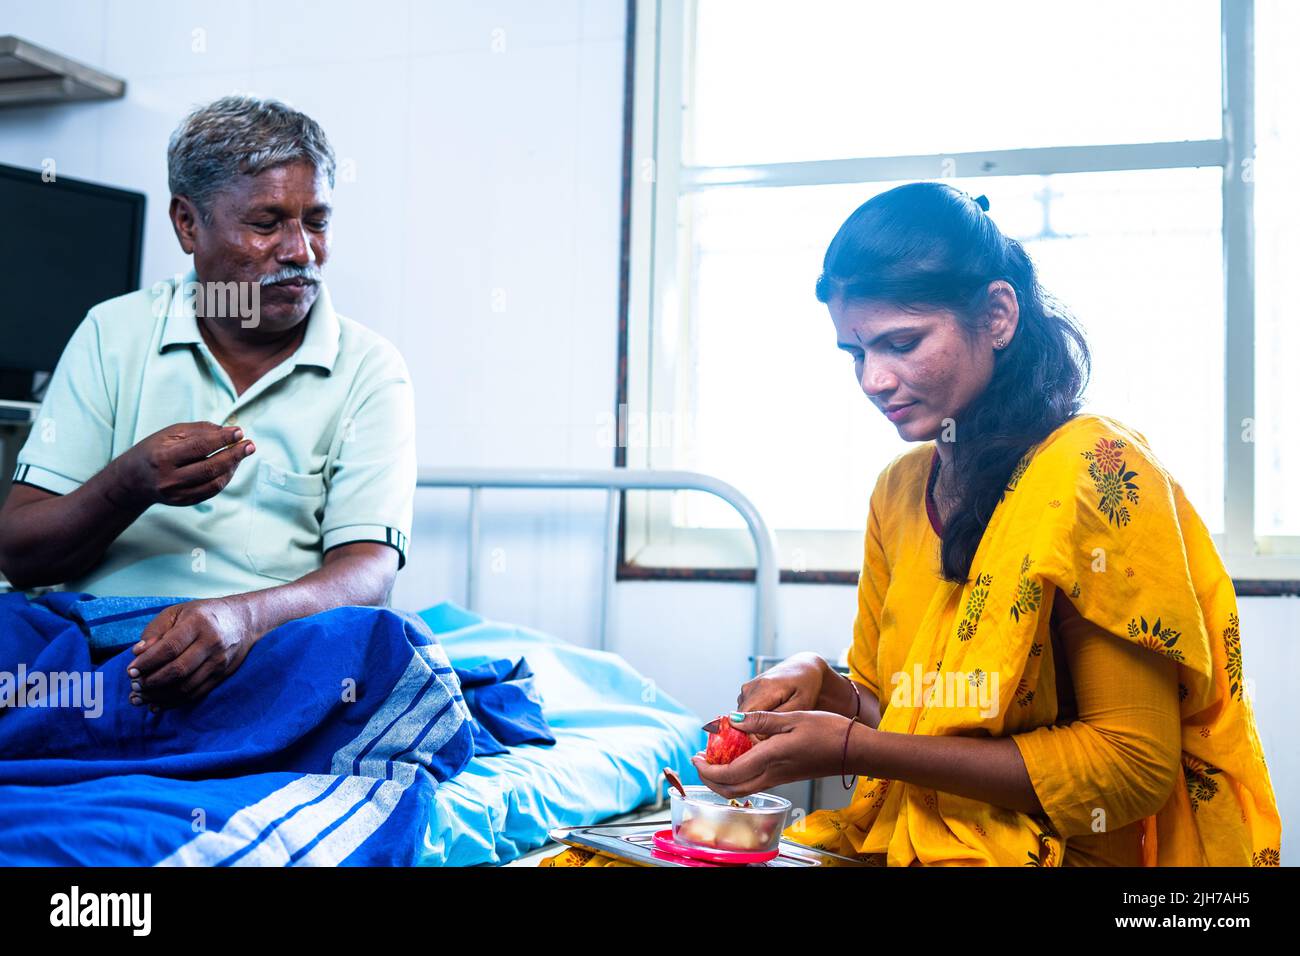 Happy smiling daughter giving fruits to recovered sick father while on bed at hospital - concept of health care, bonding and family support. Stock Photo